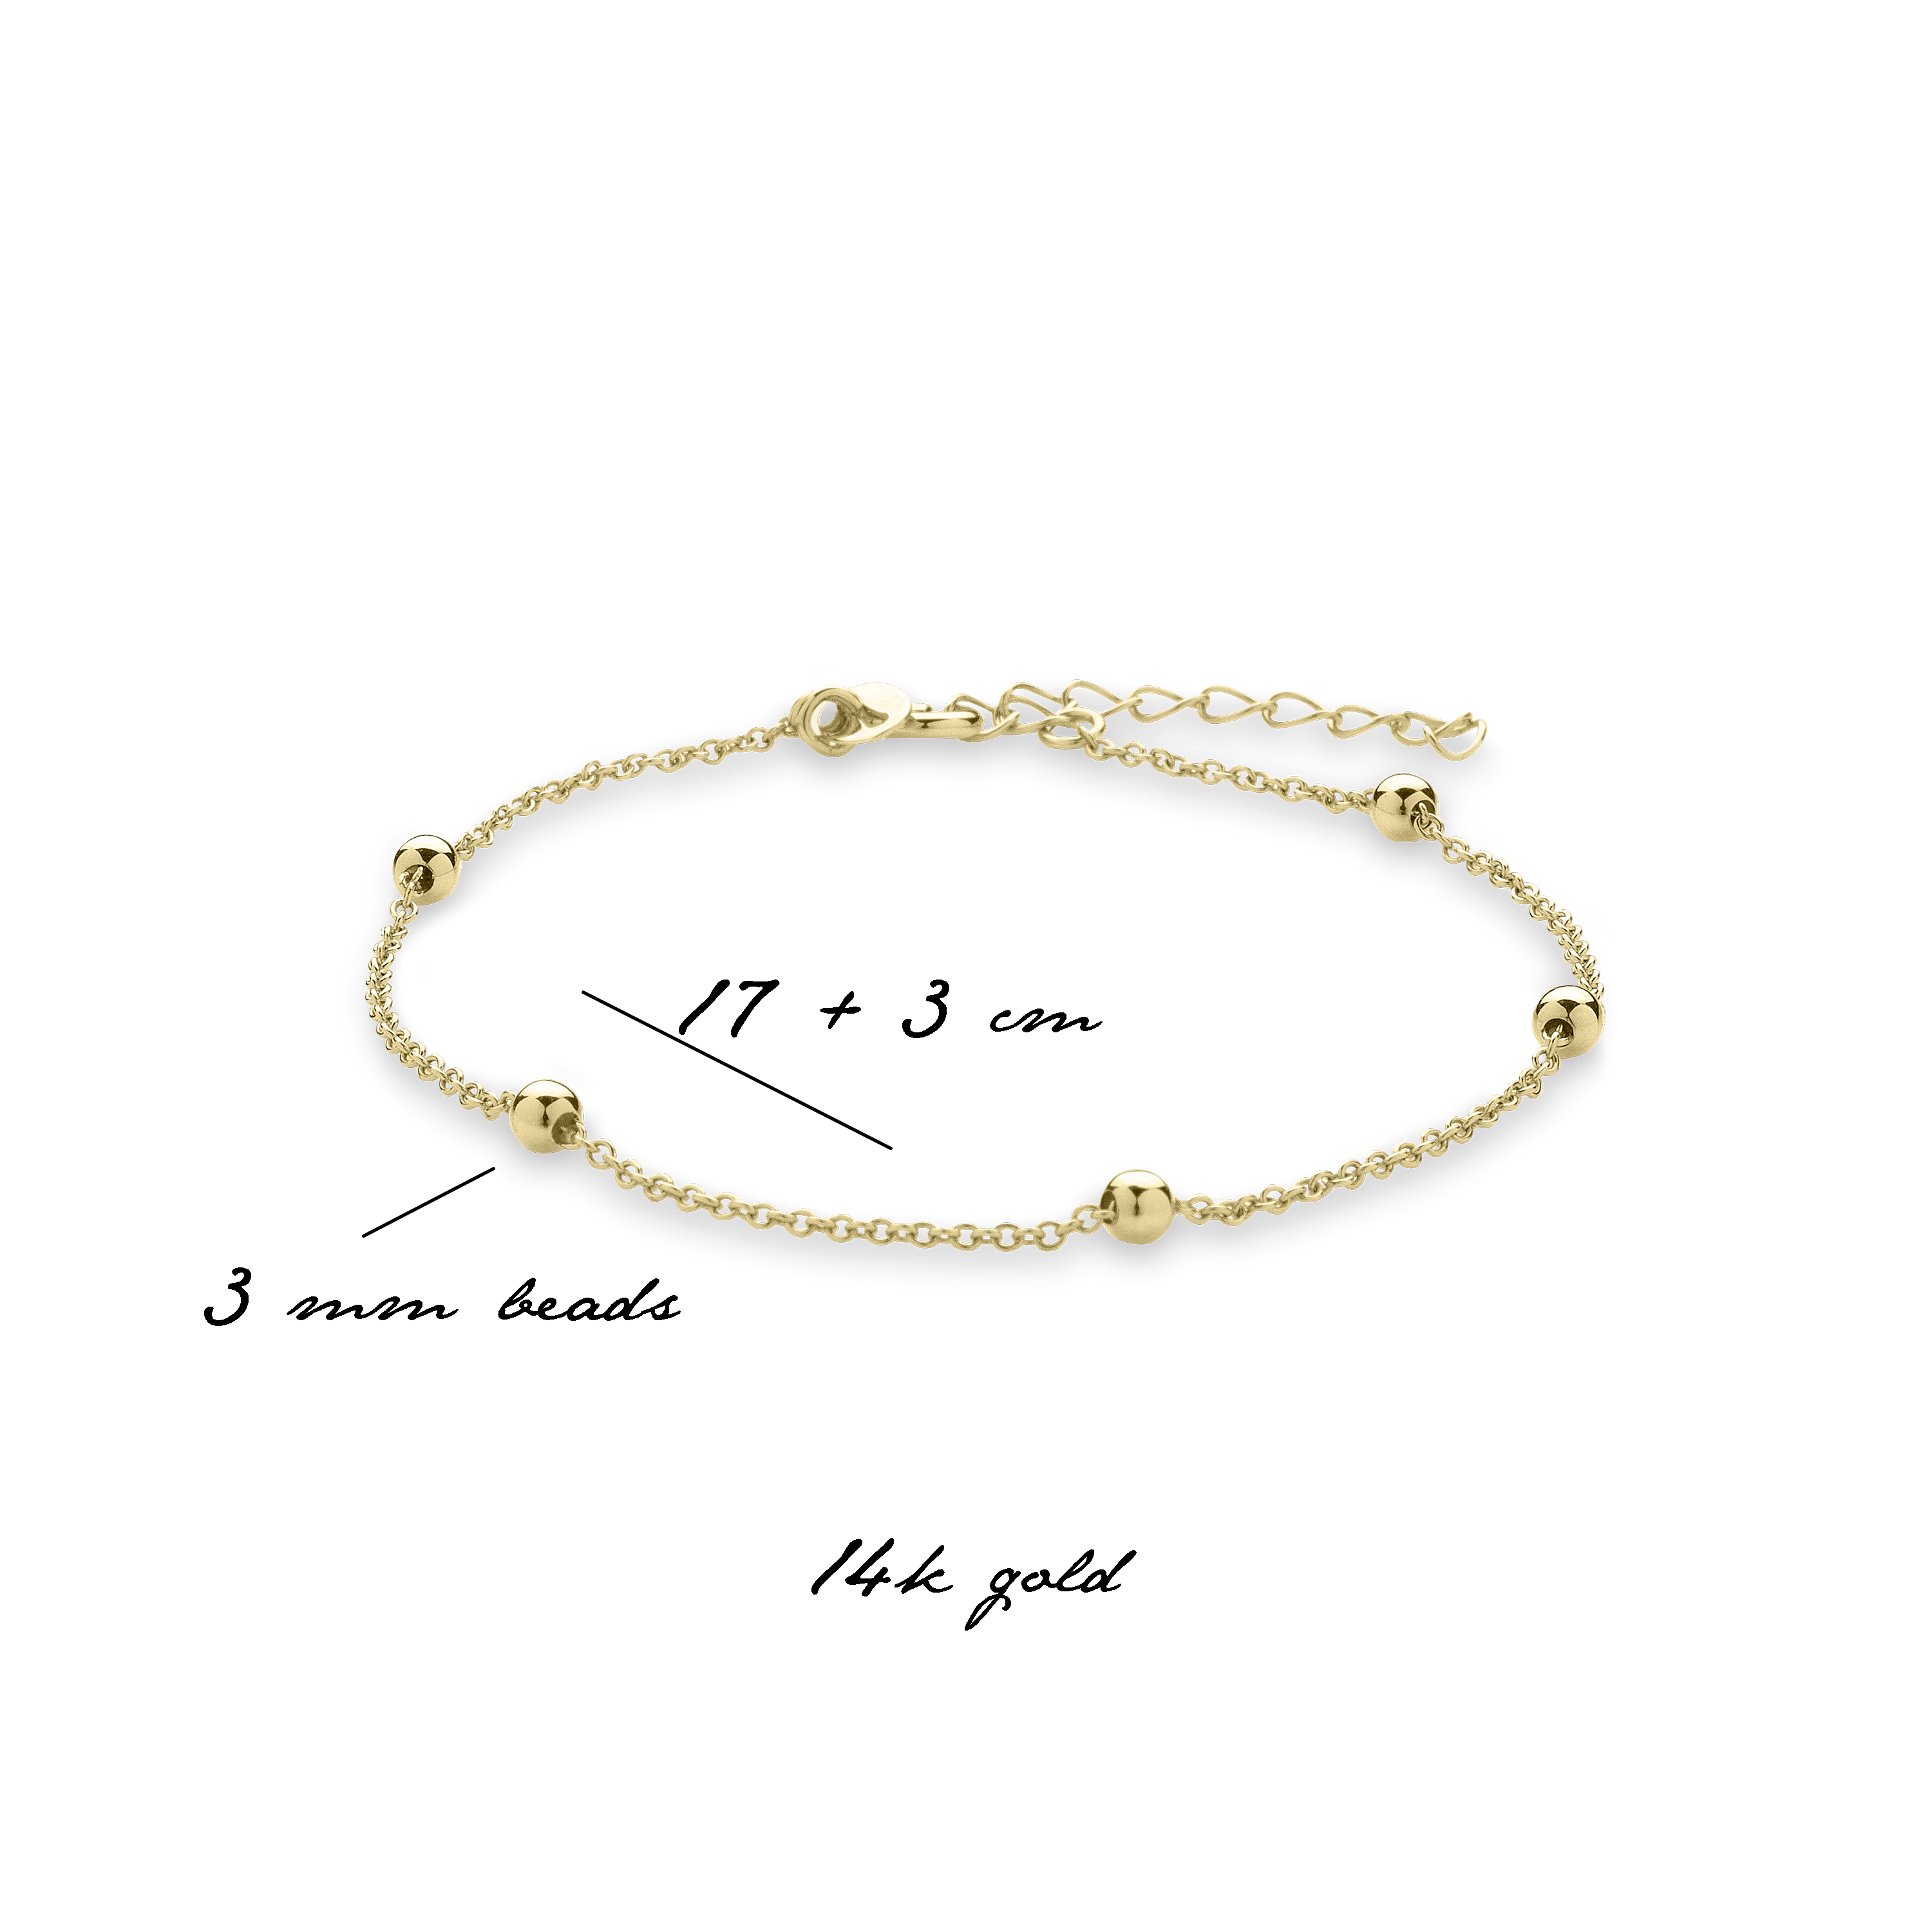 Gisser Jewels Gold Bracelet with Beads